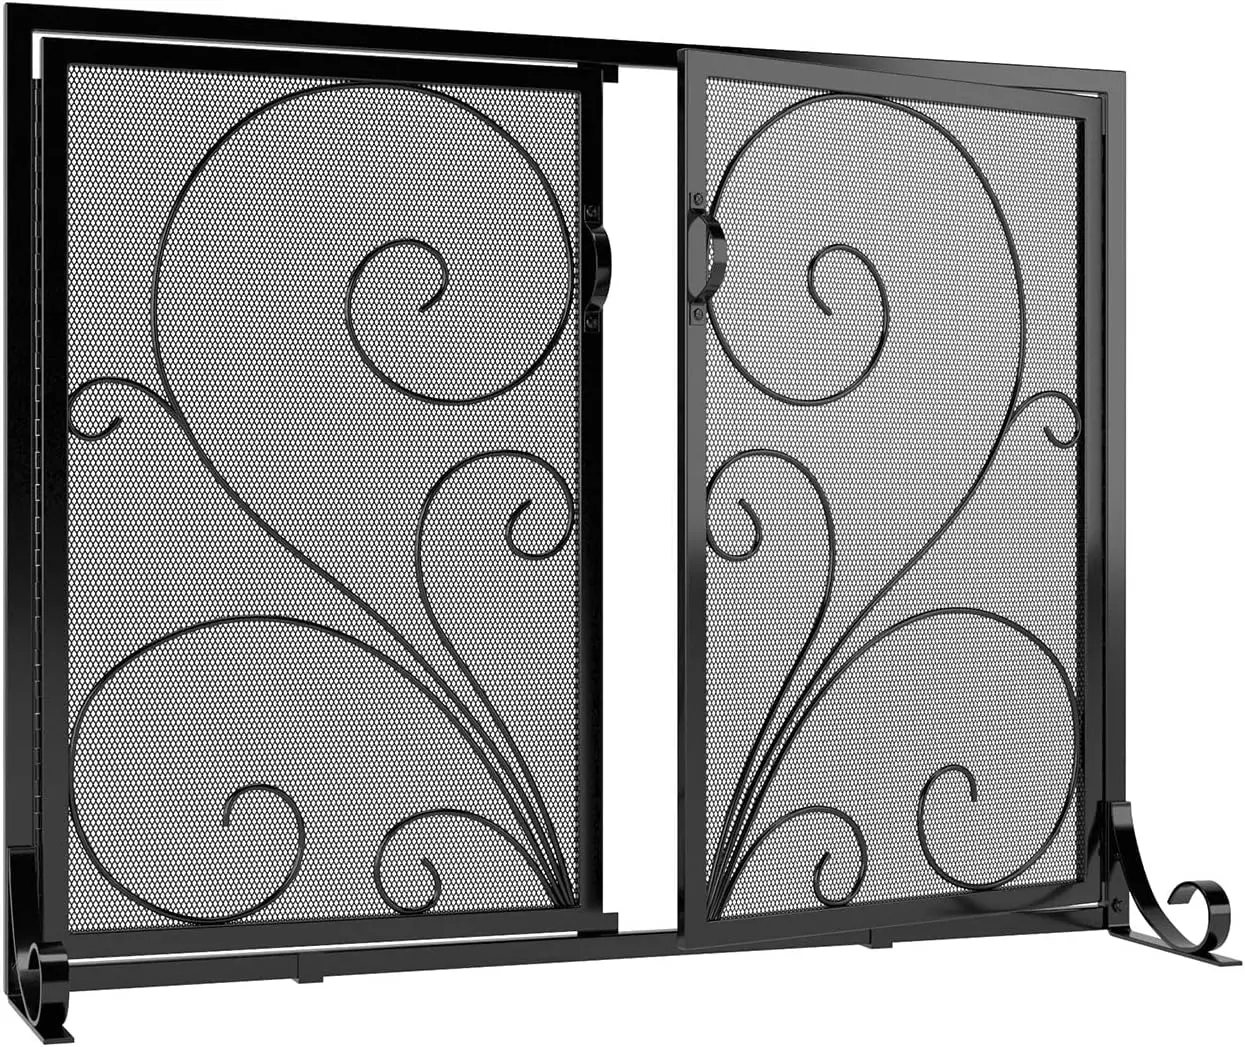 

Fireplace Screen with Doors,Solid Wrought Iron Frame with Metal Mesh, Flat Panel Decorative Fireplace Screen with Scroll Design,